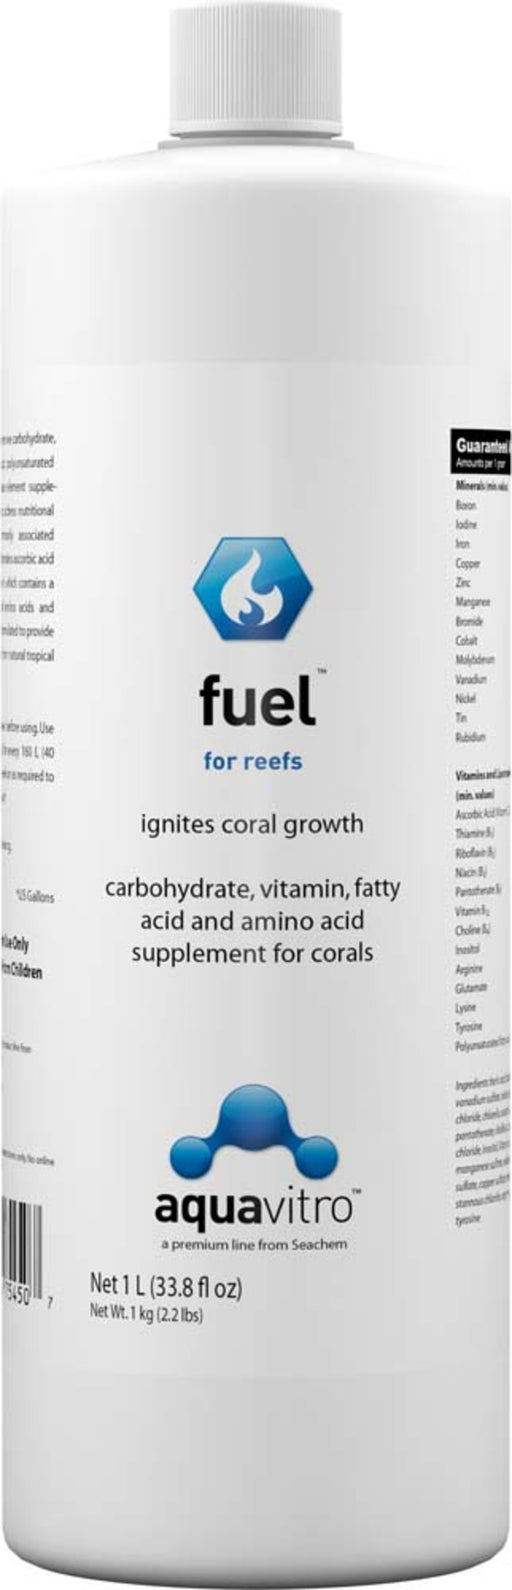 Fuel Carbohydrate, Vitamin, FattyAcid and Amino Acid Supplement for Corals